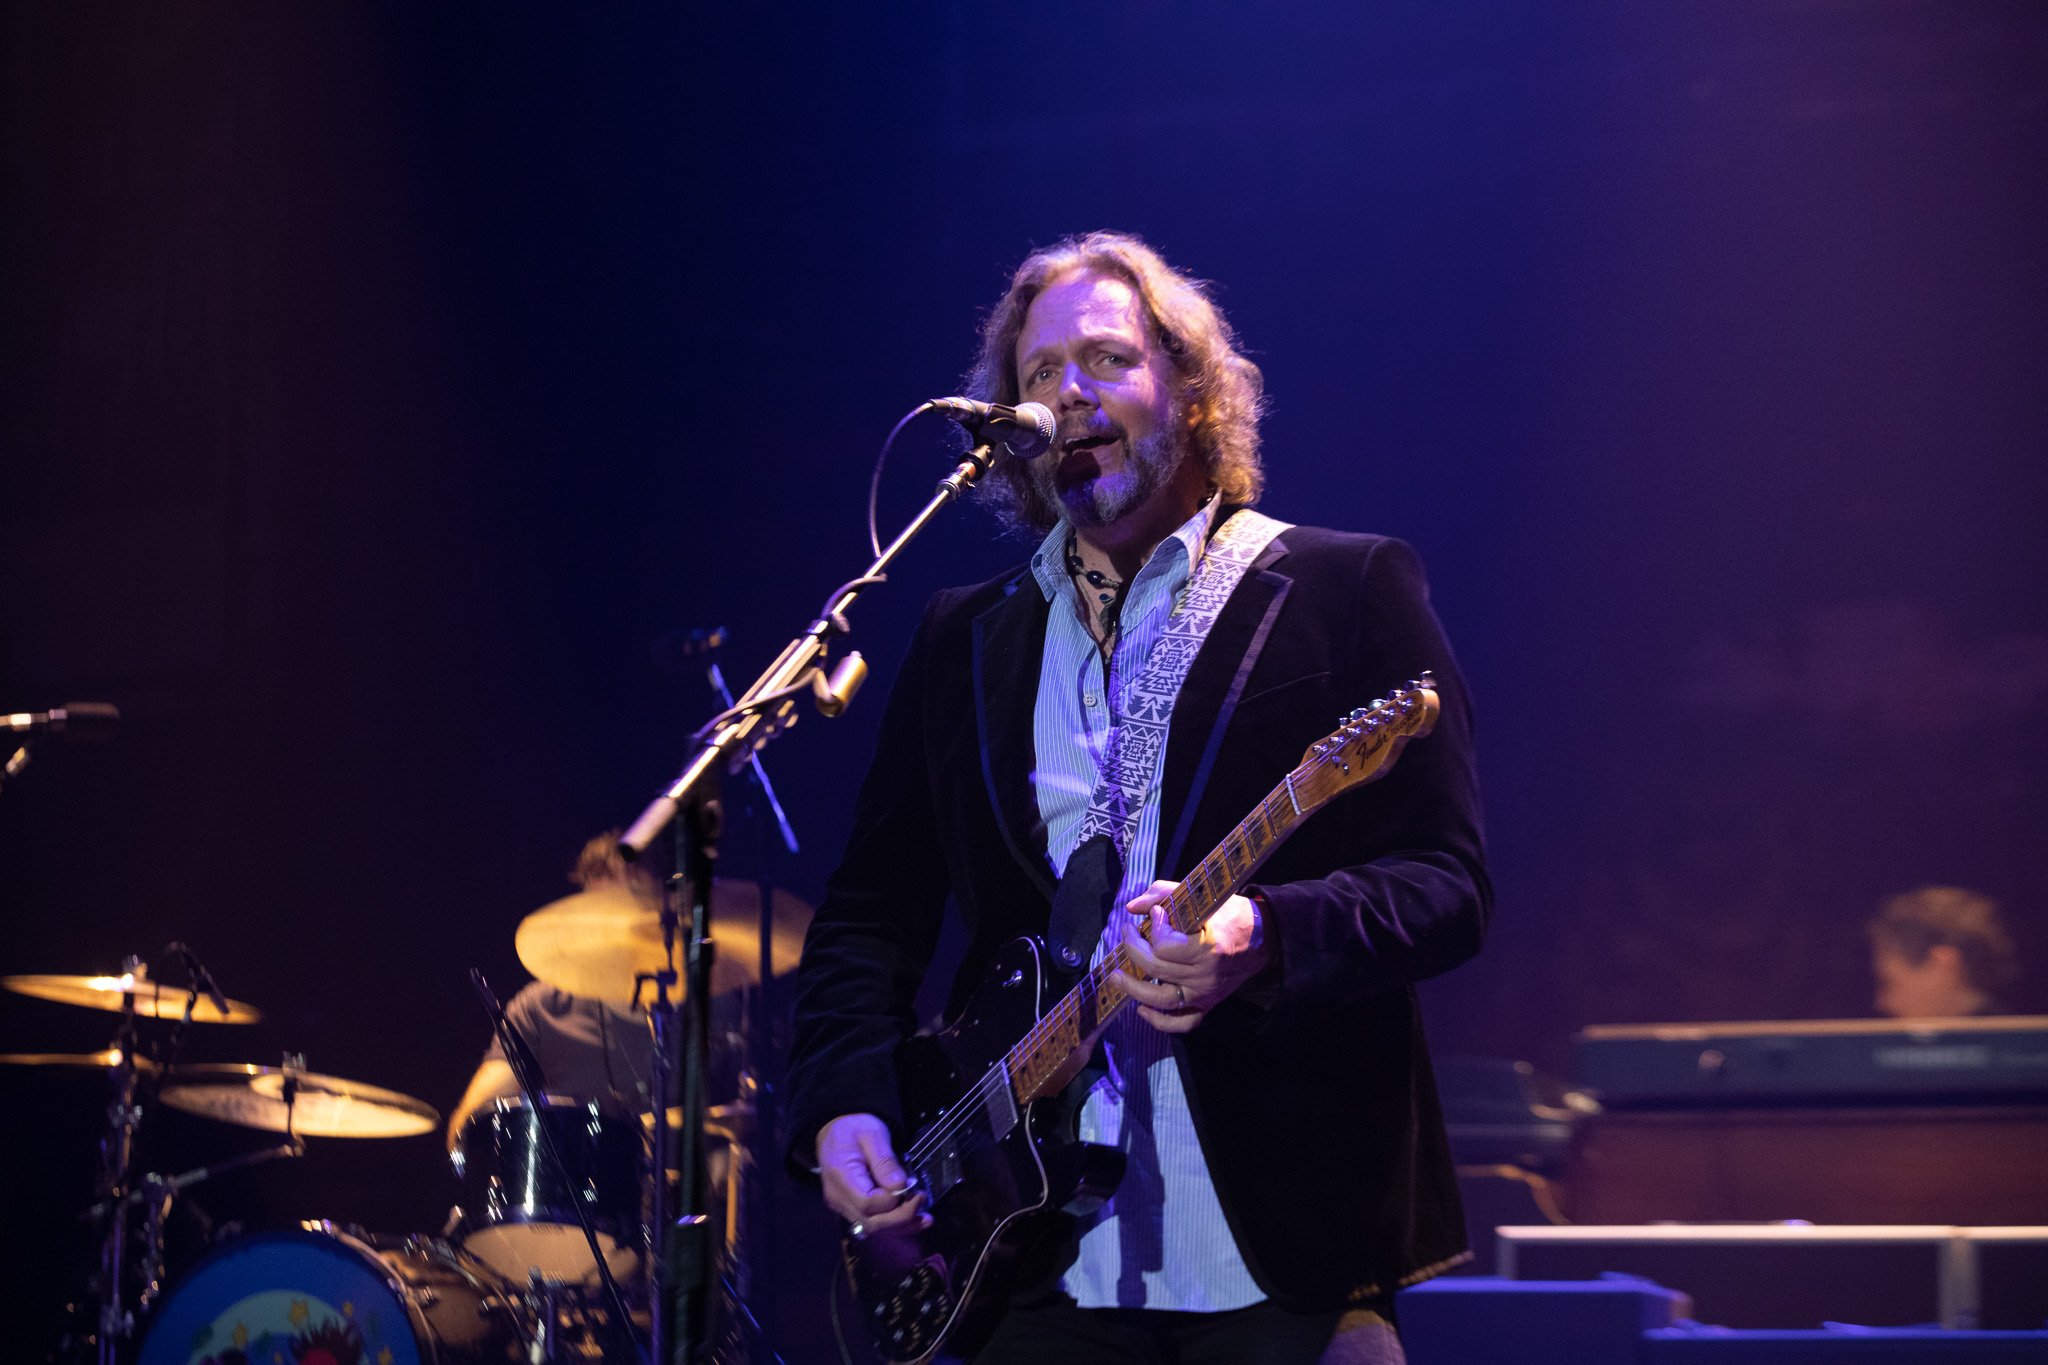 The Black Crowes at the O2 Apollo in Manchester on September 24t